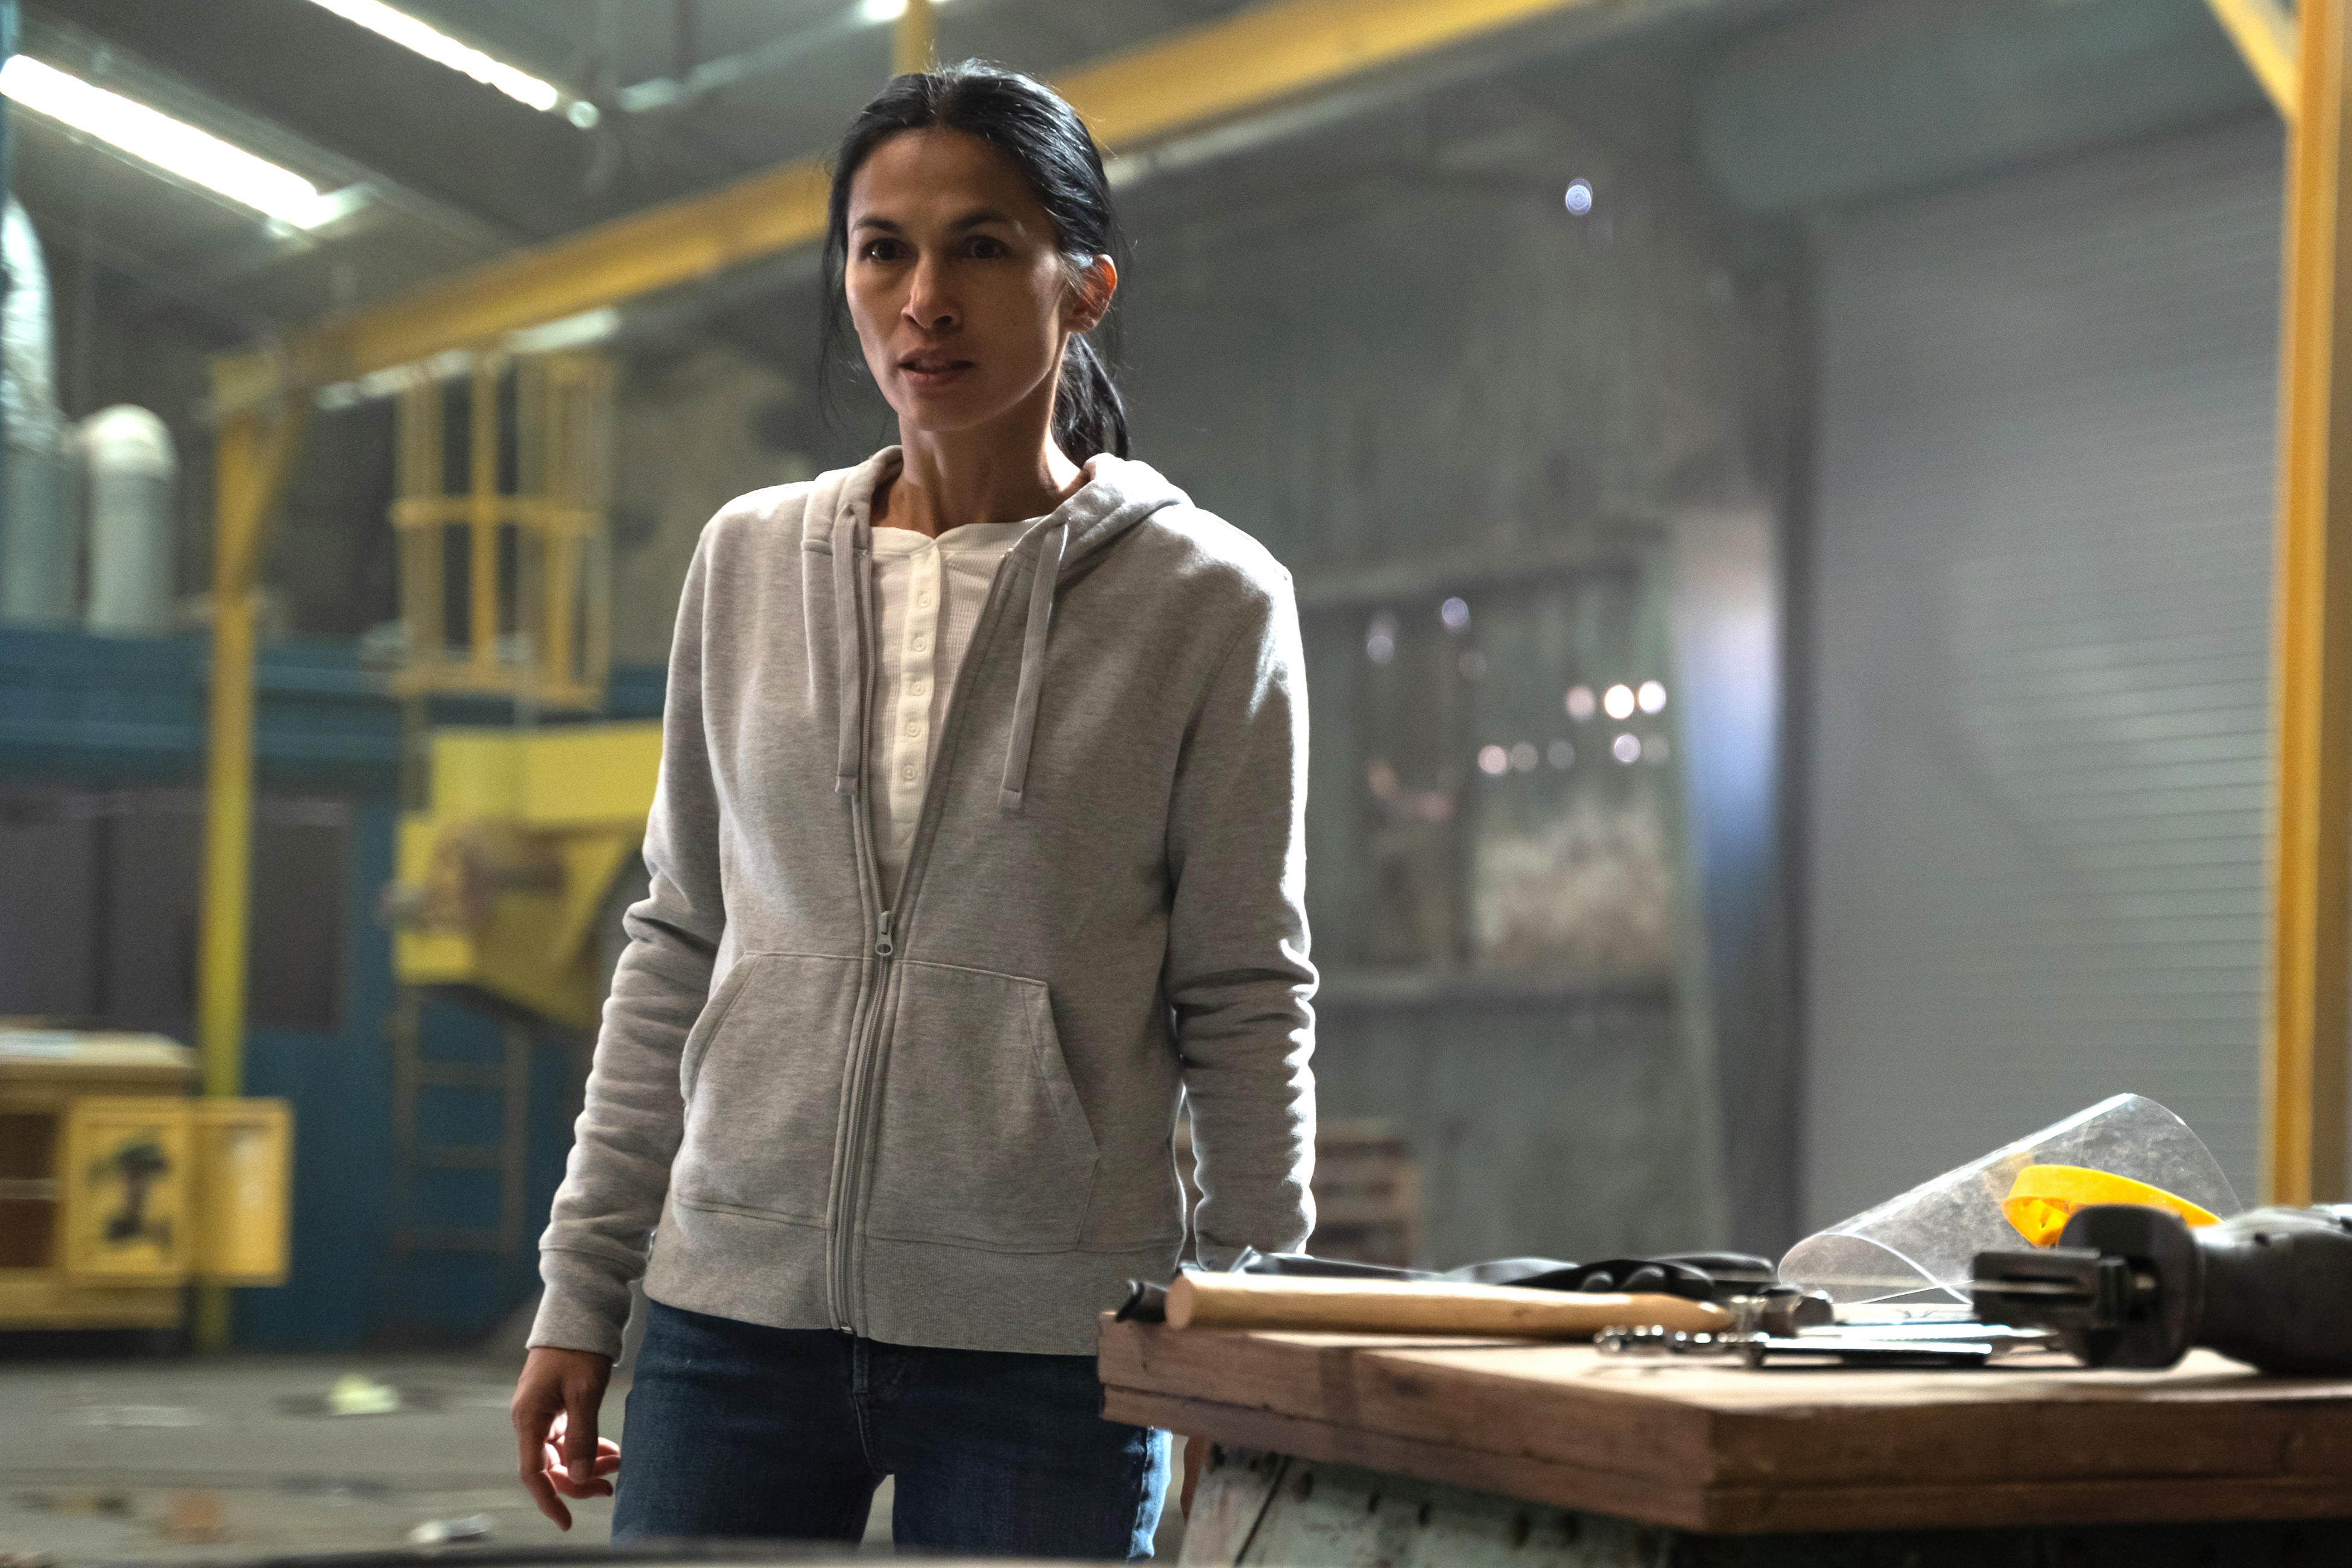 Woman in a casual hoodie stands in an industrial setting, possibly a scene from a TV show or movie